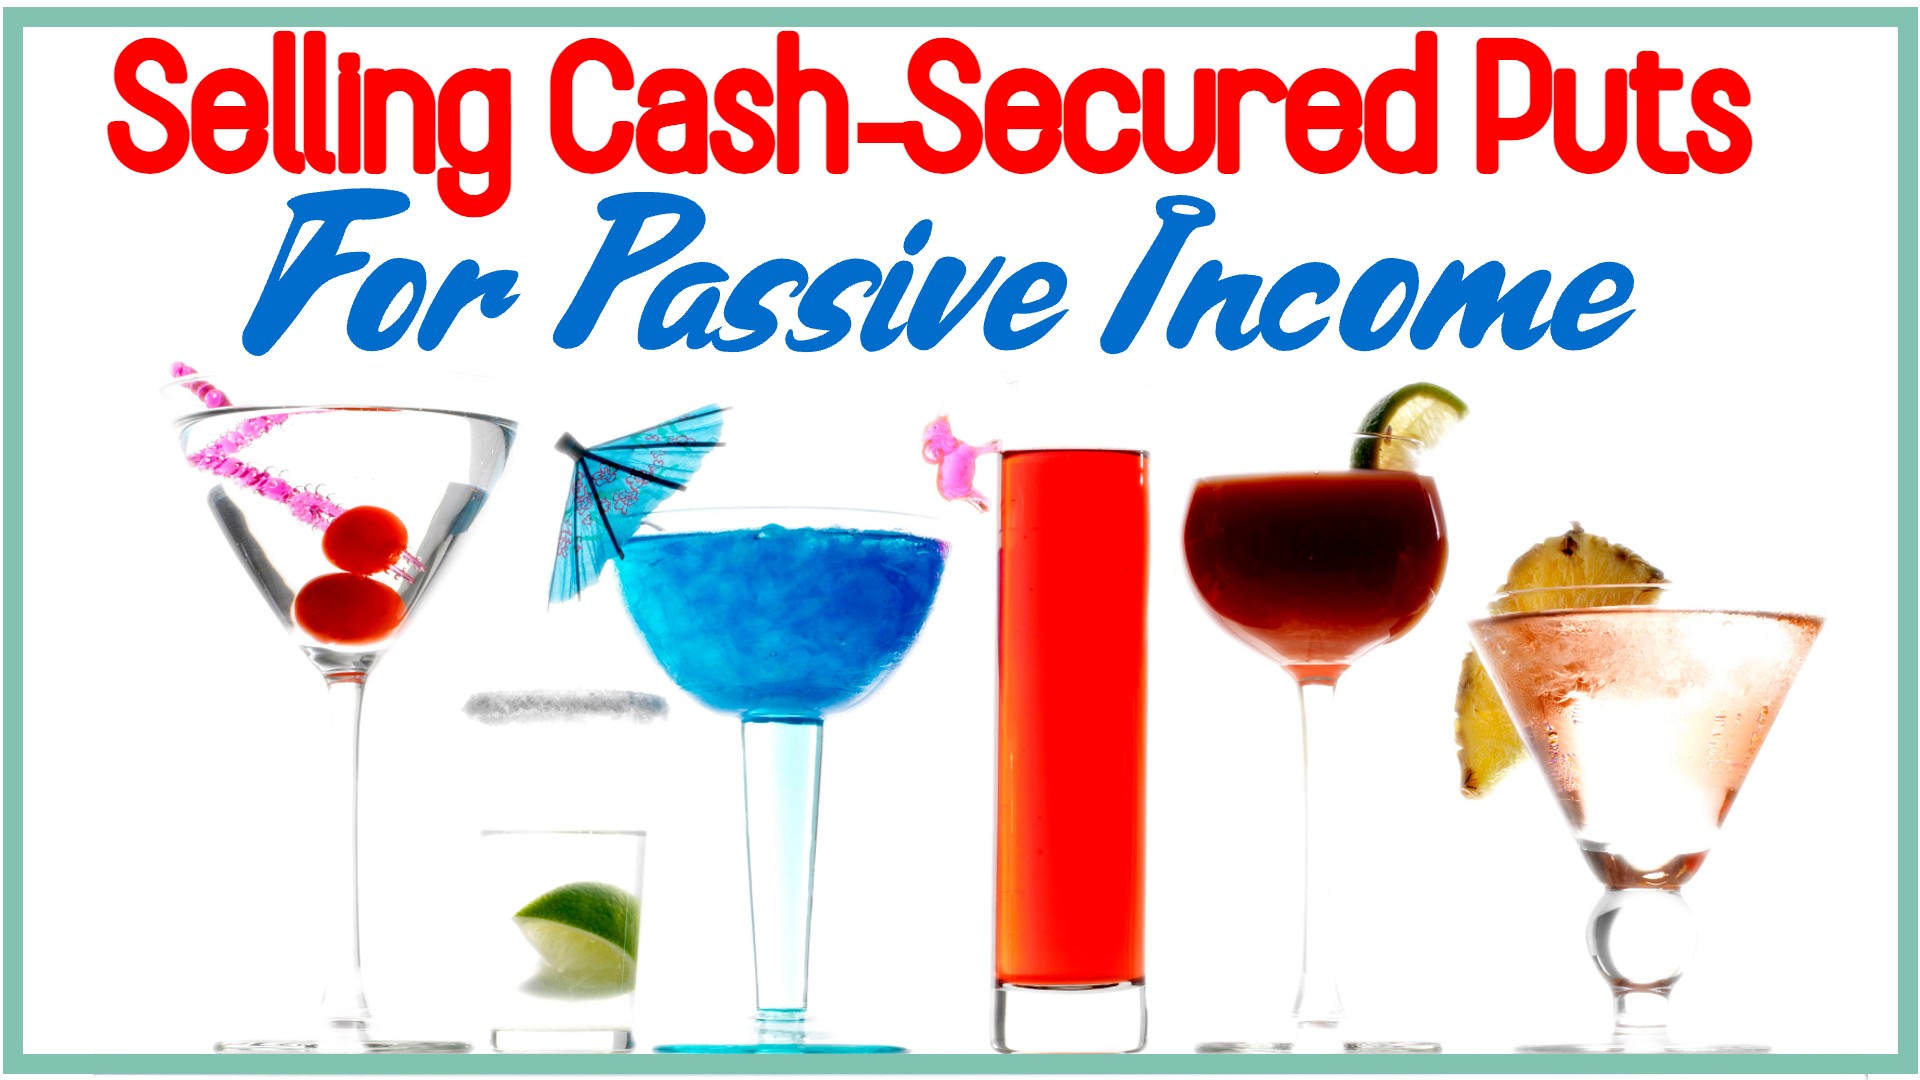 Selling Cash Secured Puts for Passive Income